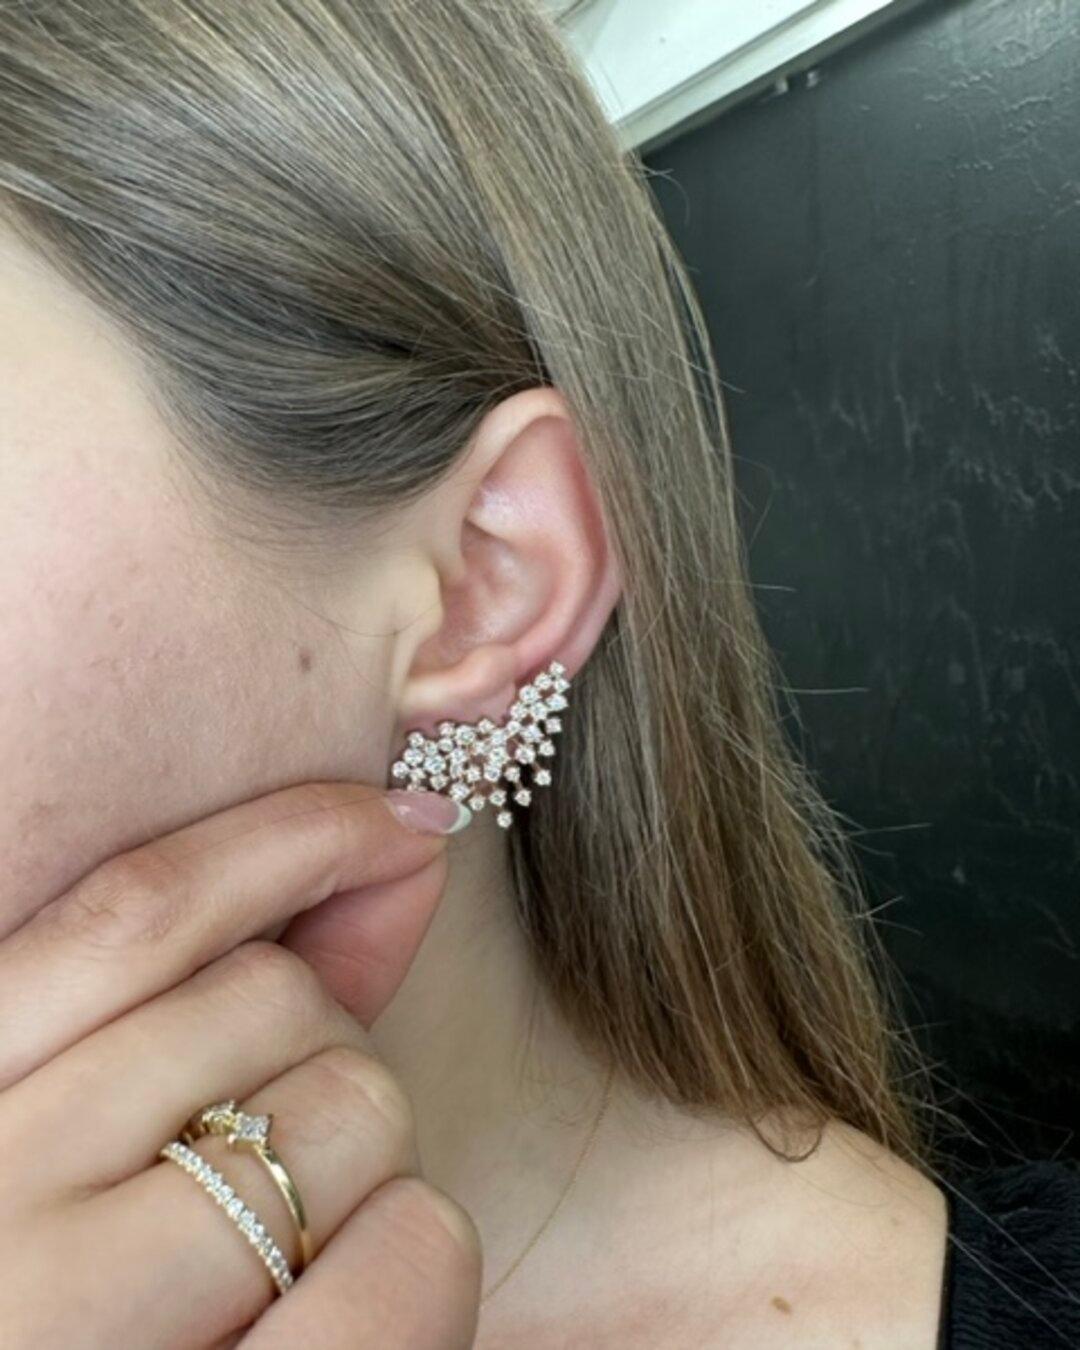 Crafted with care and precision, these beautiful Diamond Cluster Earrings are made with the highest quality of Gold that is built to last, and the Diamonds sparkle and shine in the light, adding a touch of glamour to any outfit. You can trust that